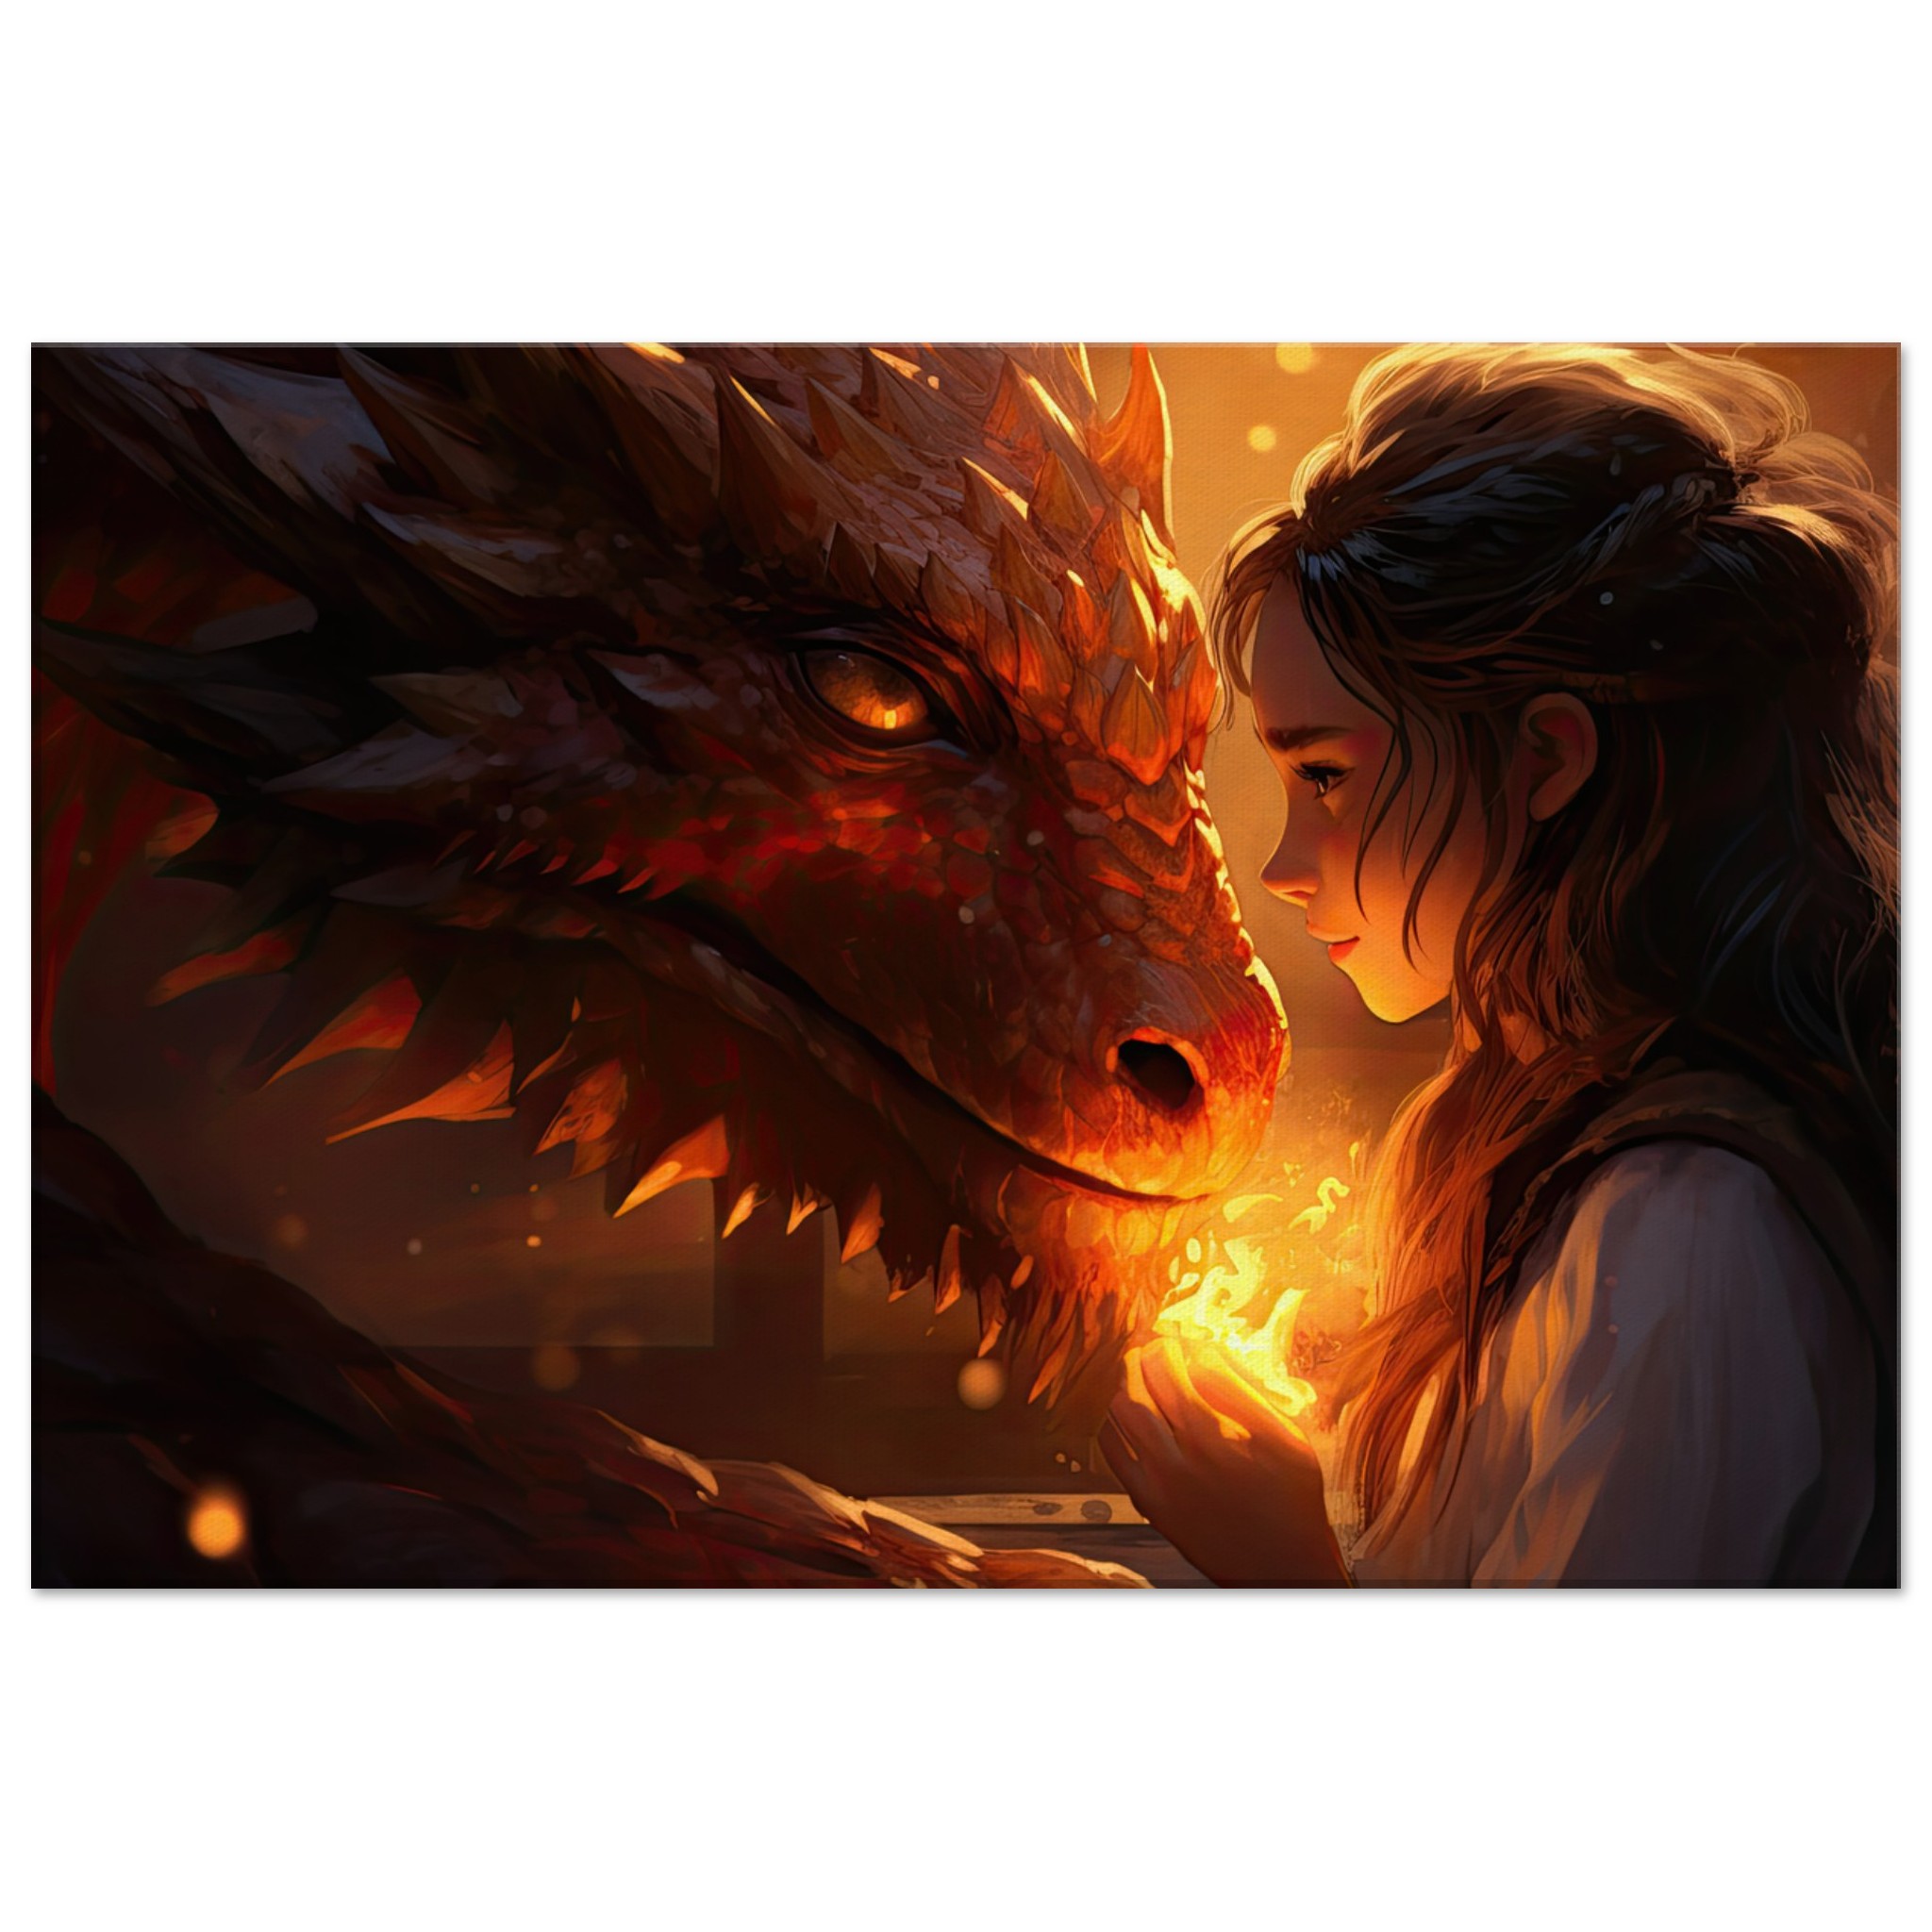 Magical Friendship – Girl and Dragon – Canvas Print – 50×75 cm / 20×30″, Thick